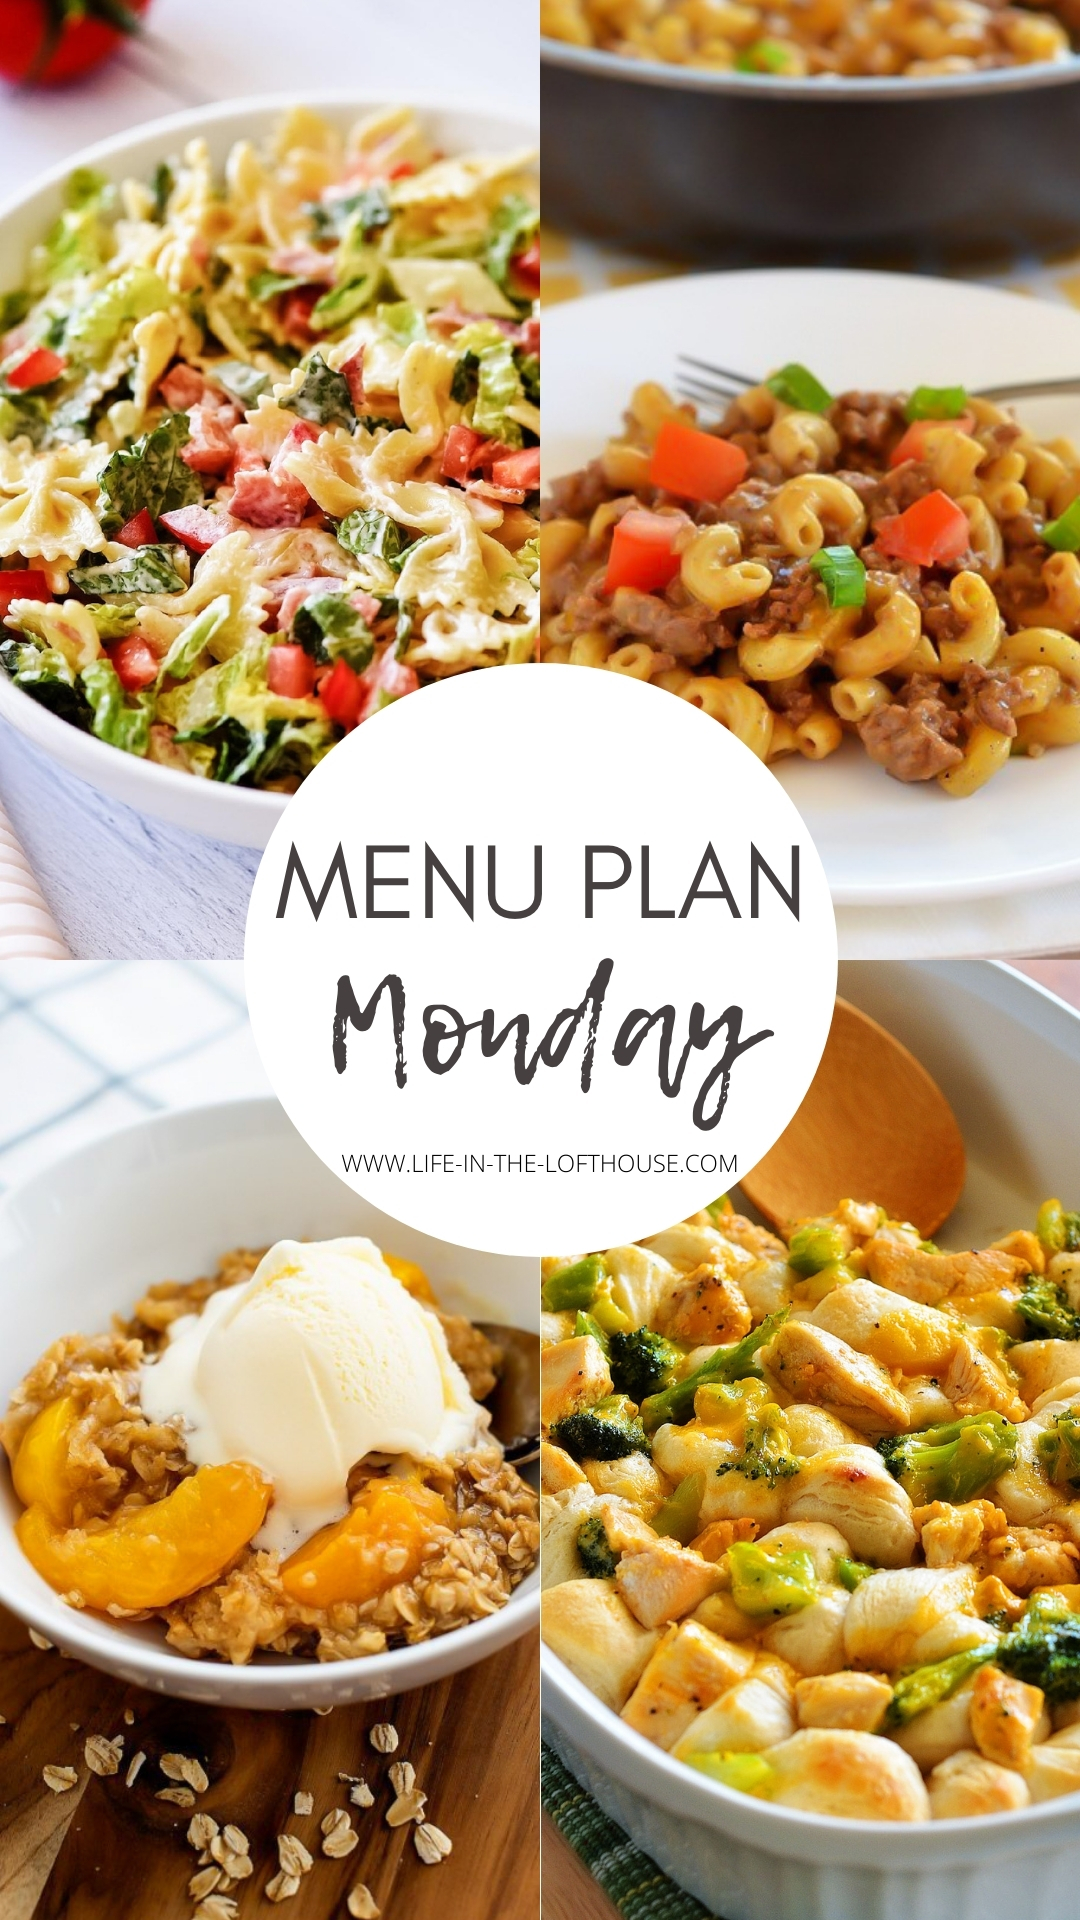 Menu Plan Monday is three steps to getting dinner on the table for your family during the week.